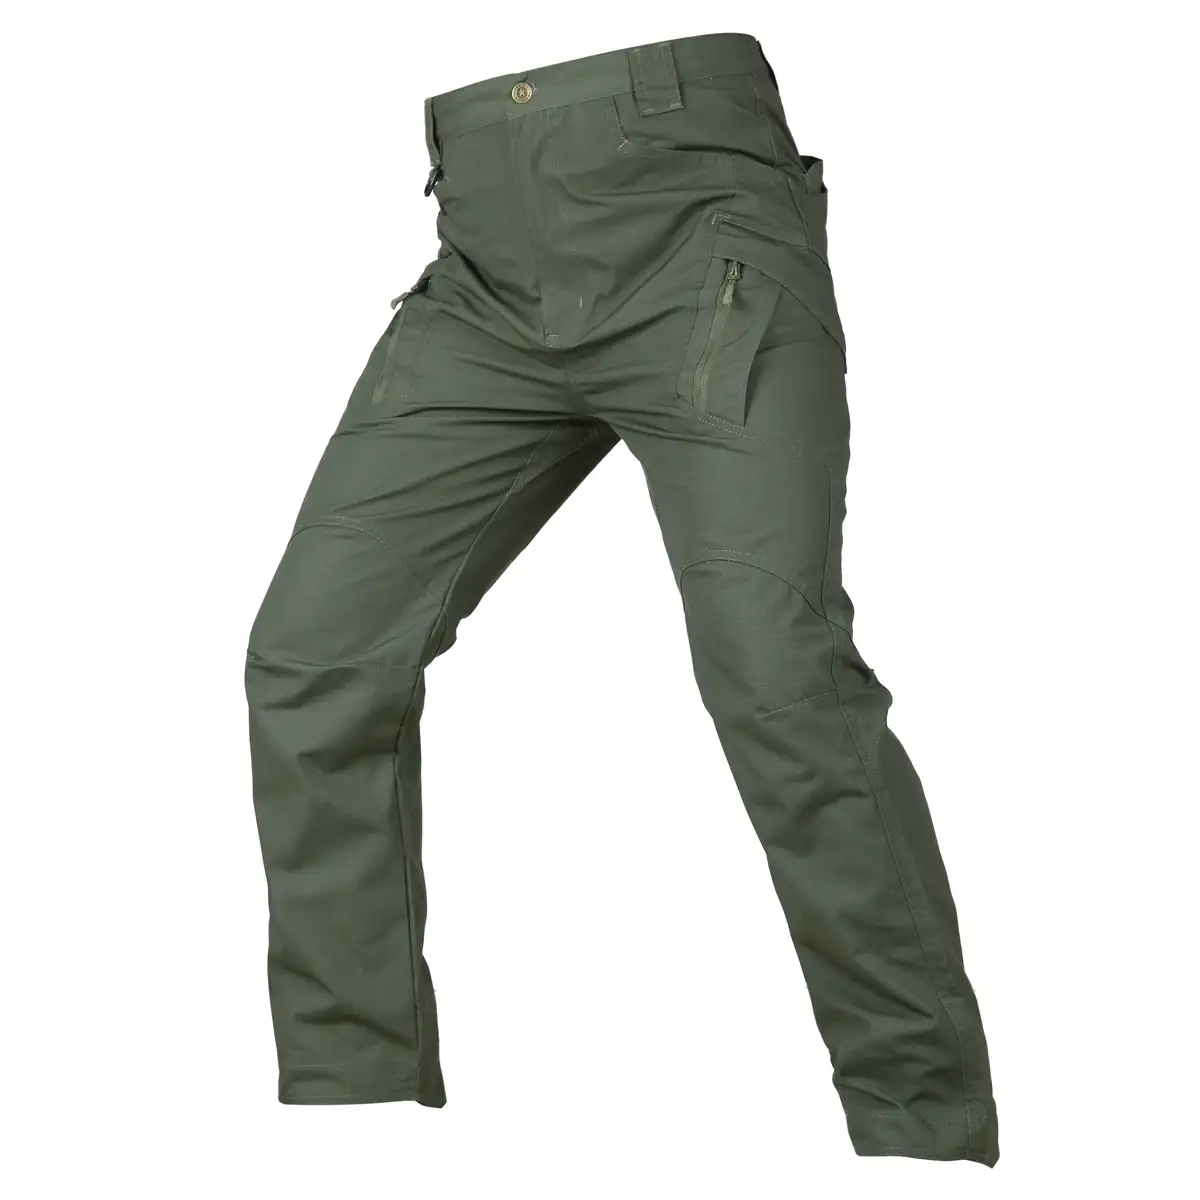 Outdoor Multi Pockets Army Trousers Military Combat Tactical Hunting Cargo Pants